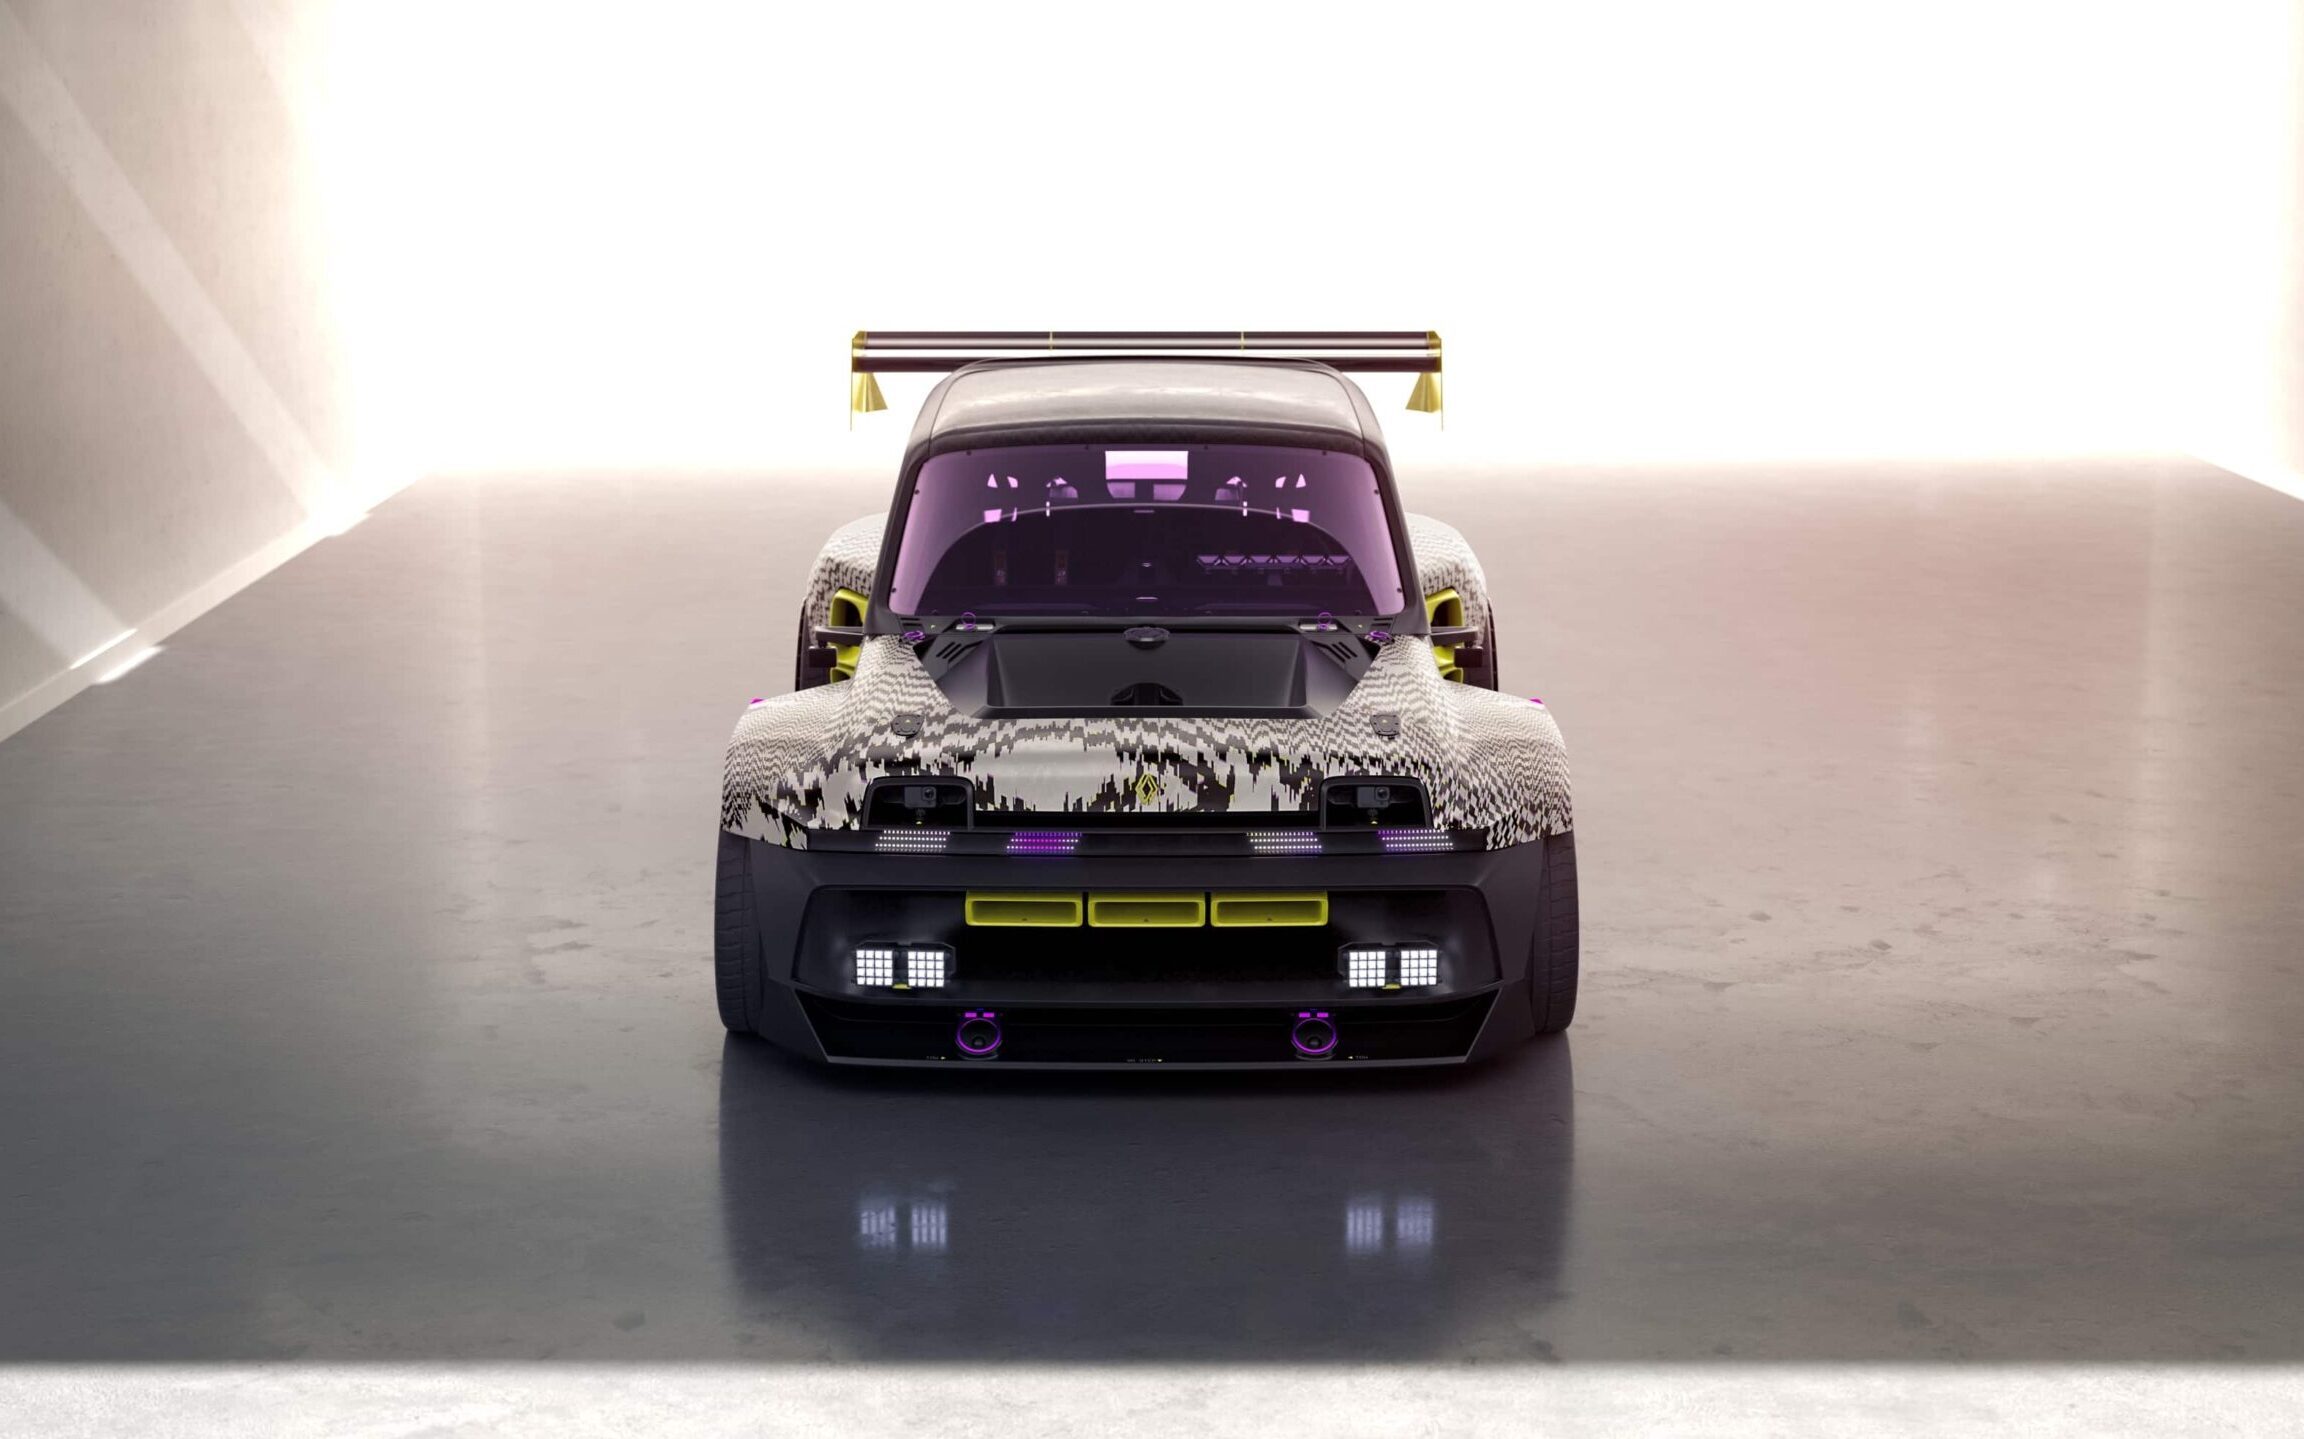 Behold the new Renault 5 Turbo 3E drift special - PistonHeads UK